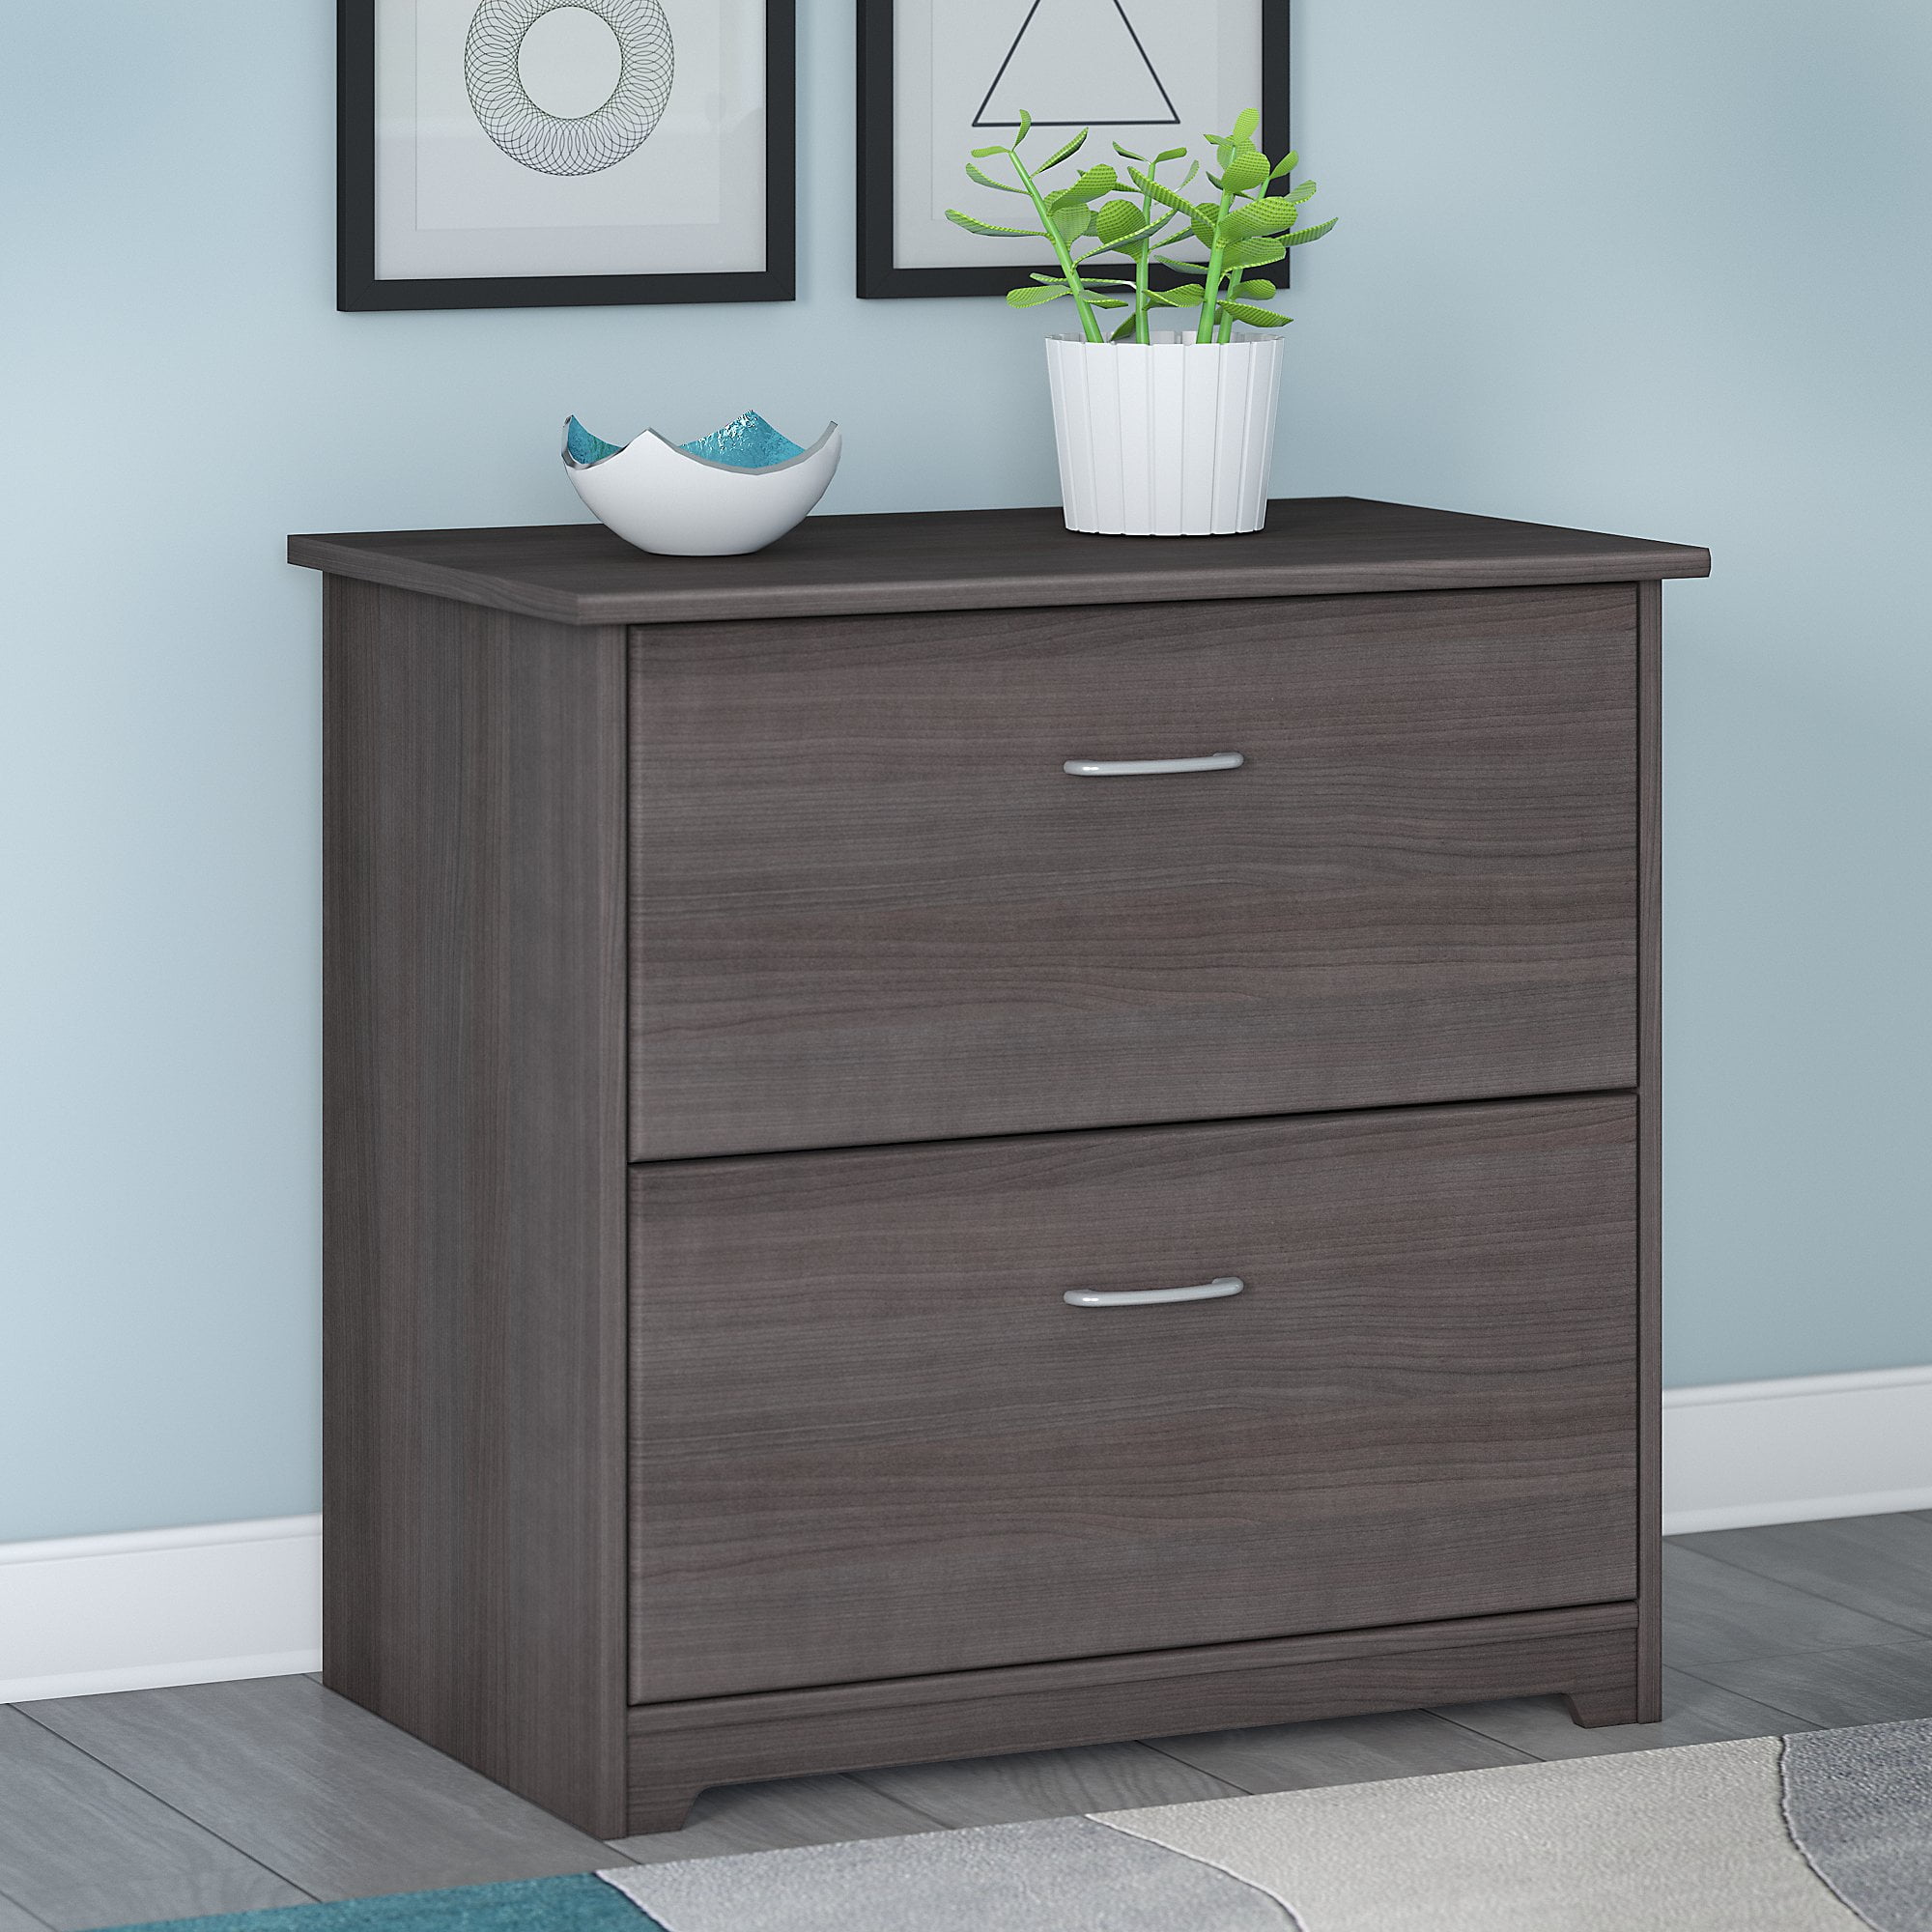 Details about   Bush Furniture Cabot Lateral File Cabinet in Heather Gray 